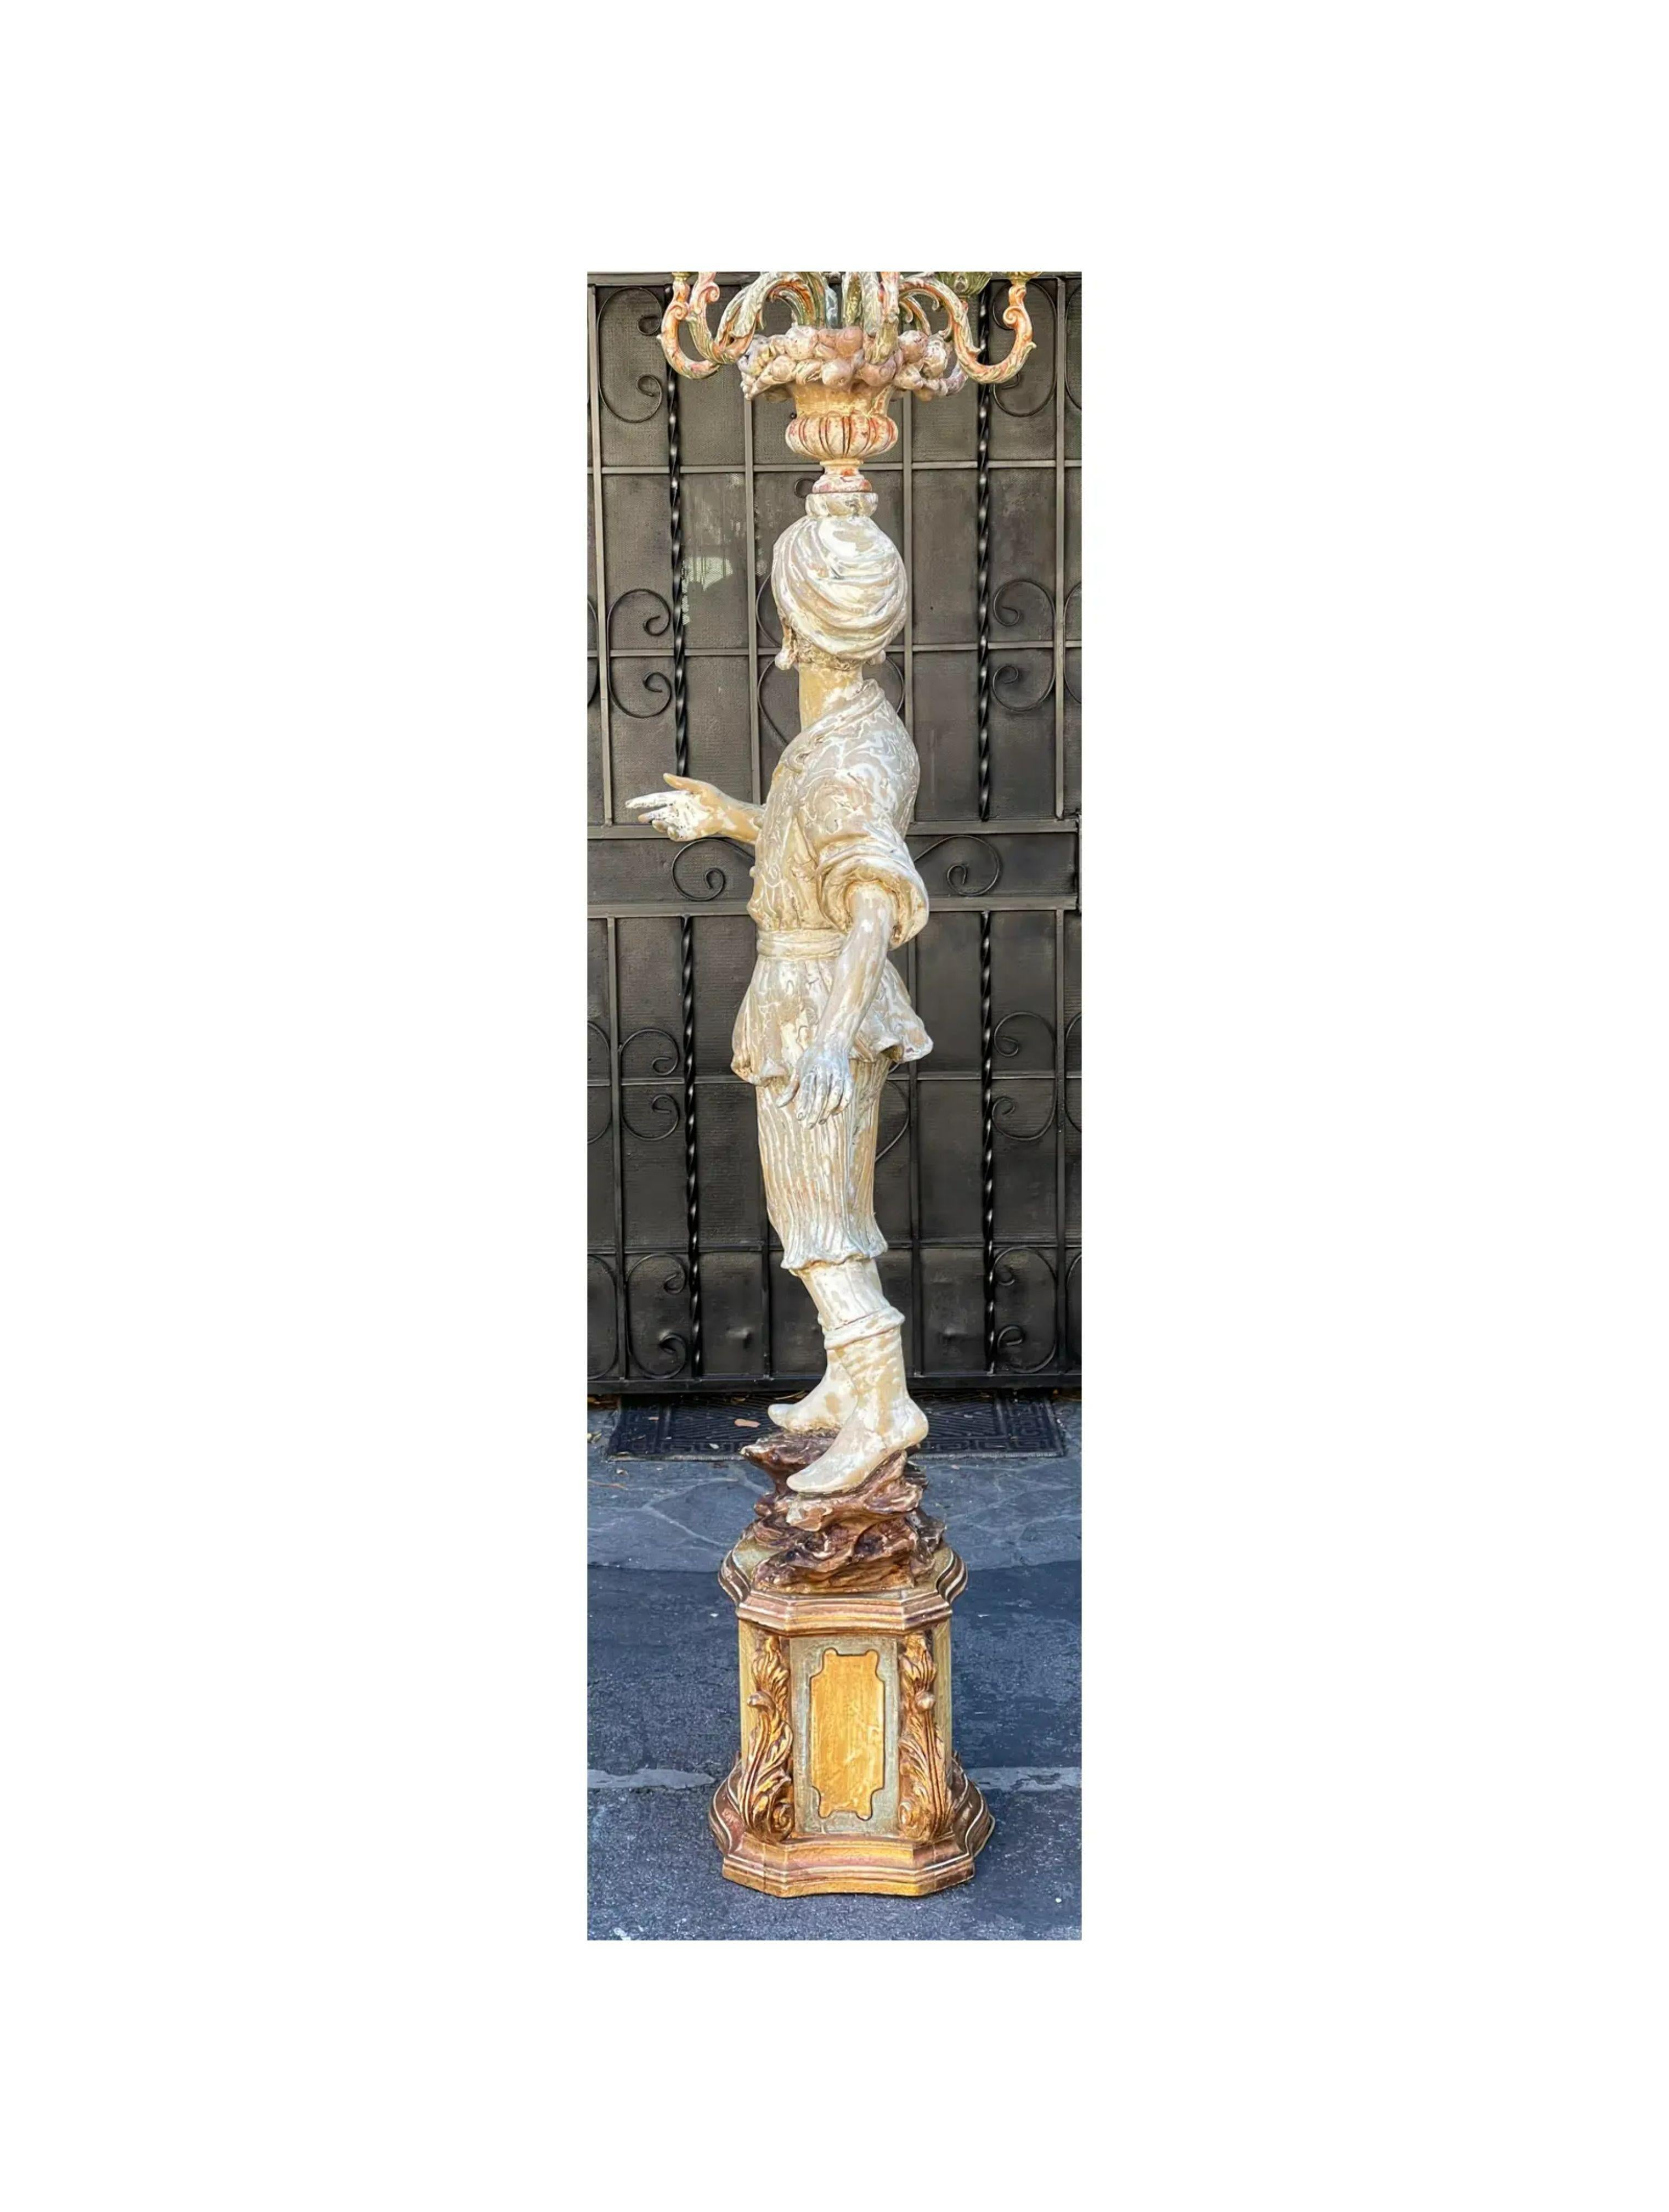 Antique Italian Figural Standing Candelabra Floor Lamp, Early 20th Century For Sale 4